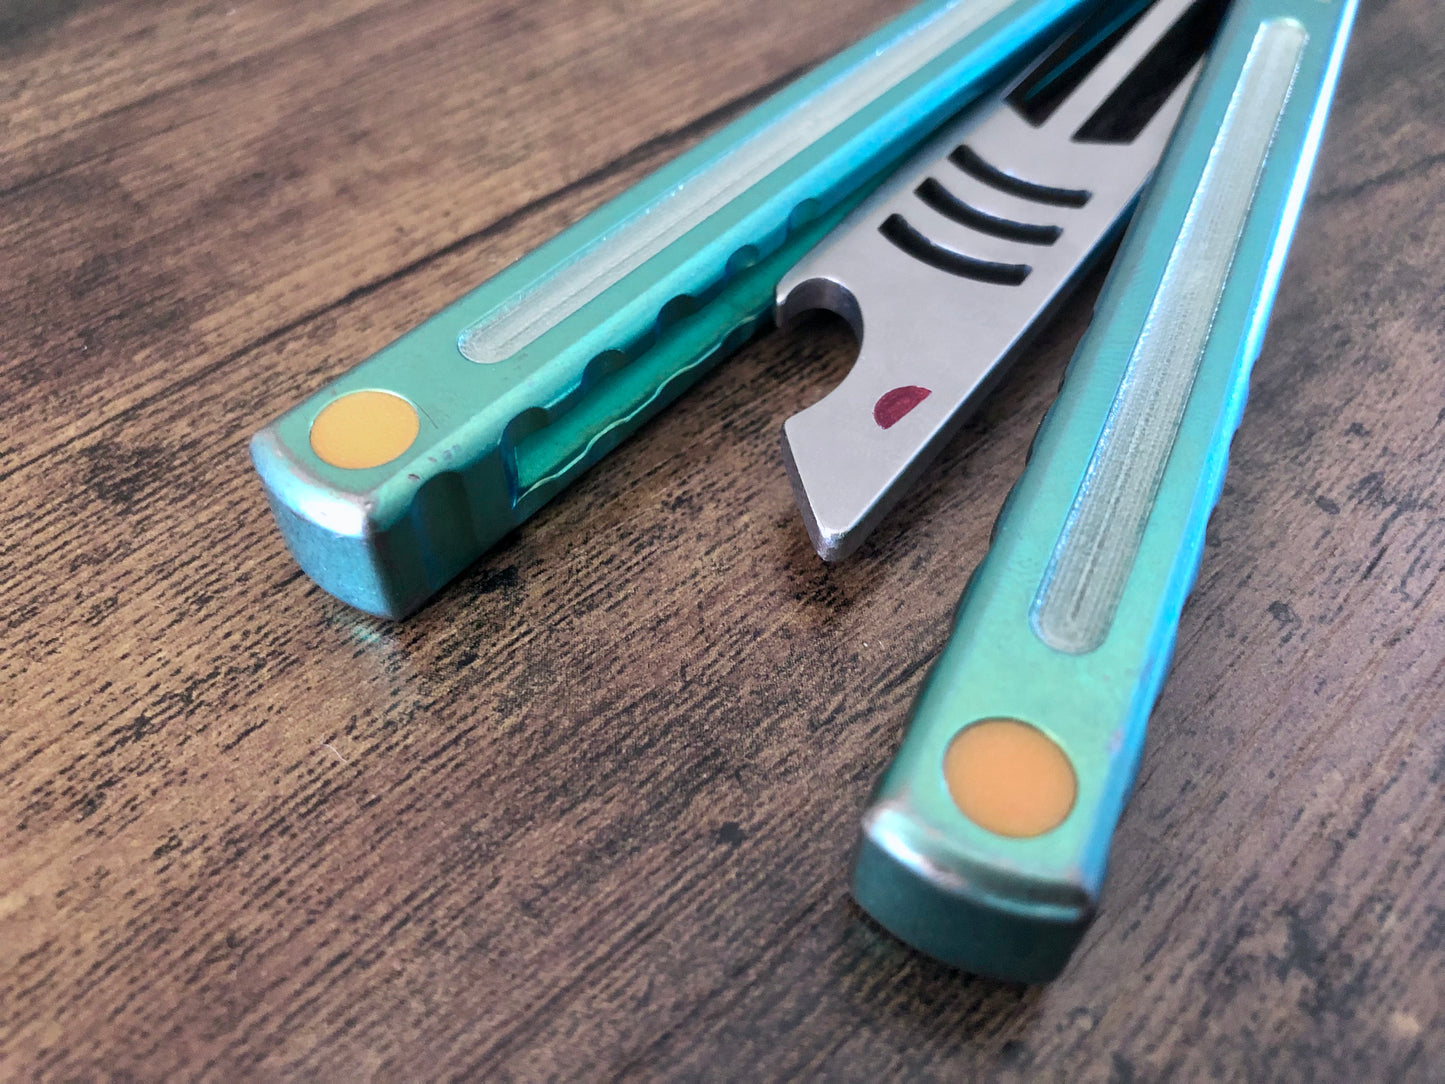 Reduce the handle bias of your Squid industries Swordfish and Madko balisong trainer with this Zippy balance mod. Replace the metal sexbolts at the base of the handles with featherweight, shatter-proof polyurethane sexbolts.